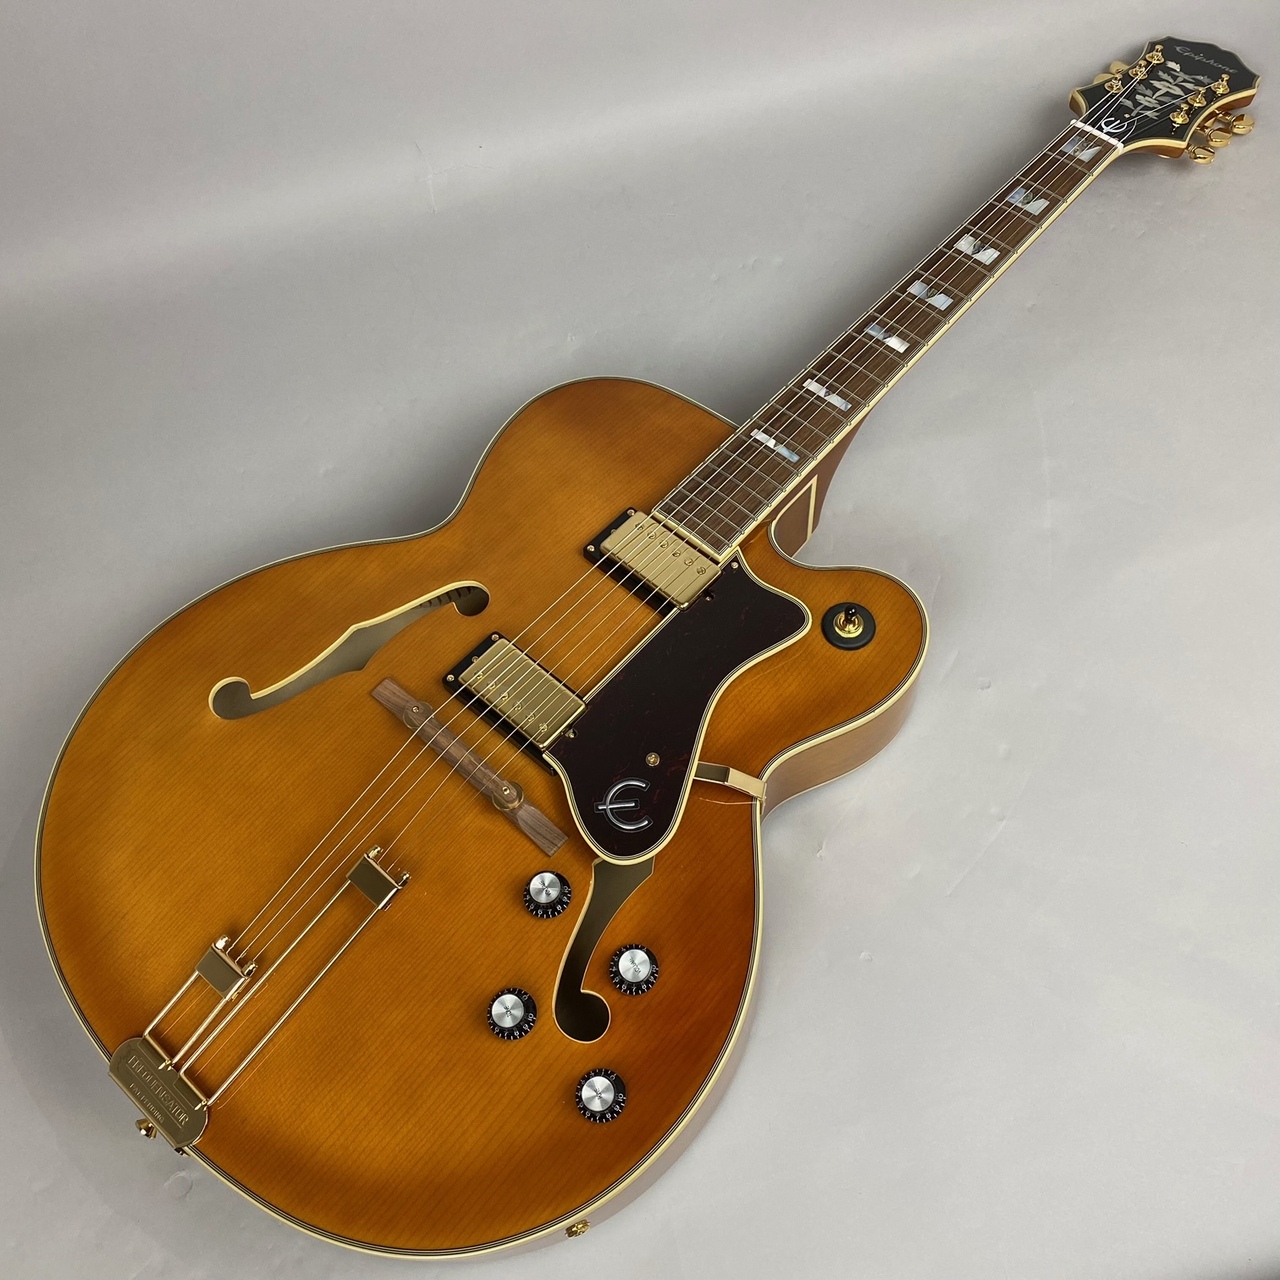 Epiphone The Broadway Vintage Natural エレキギター エピフォン